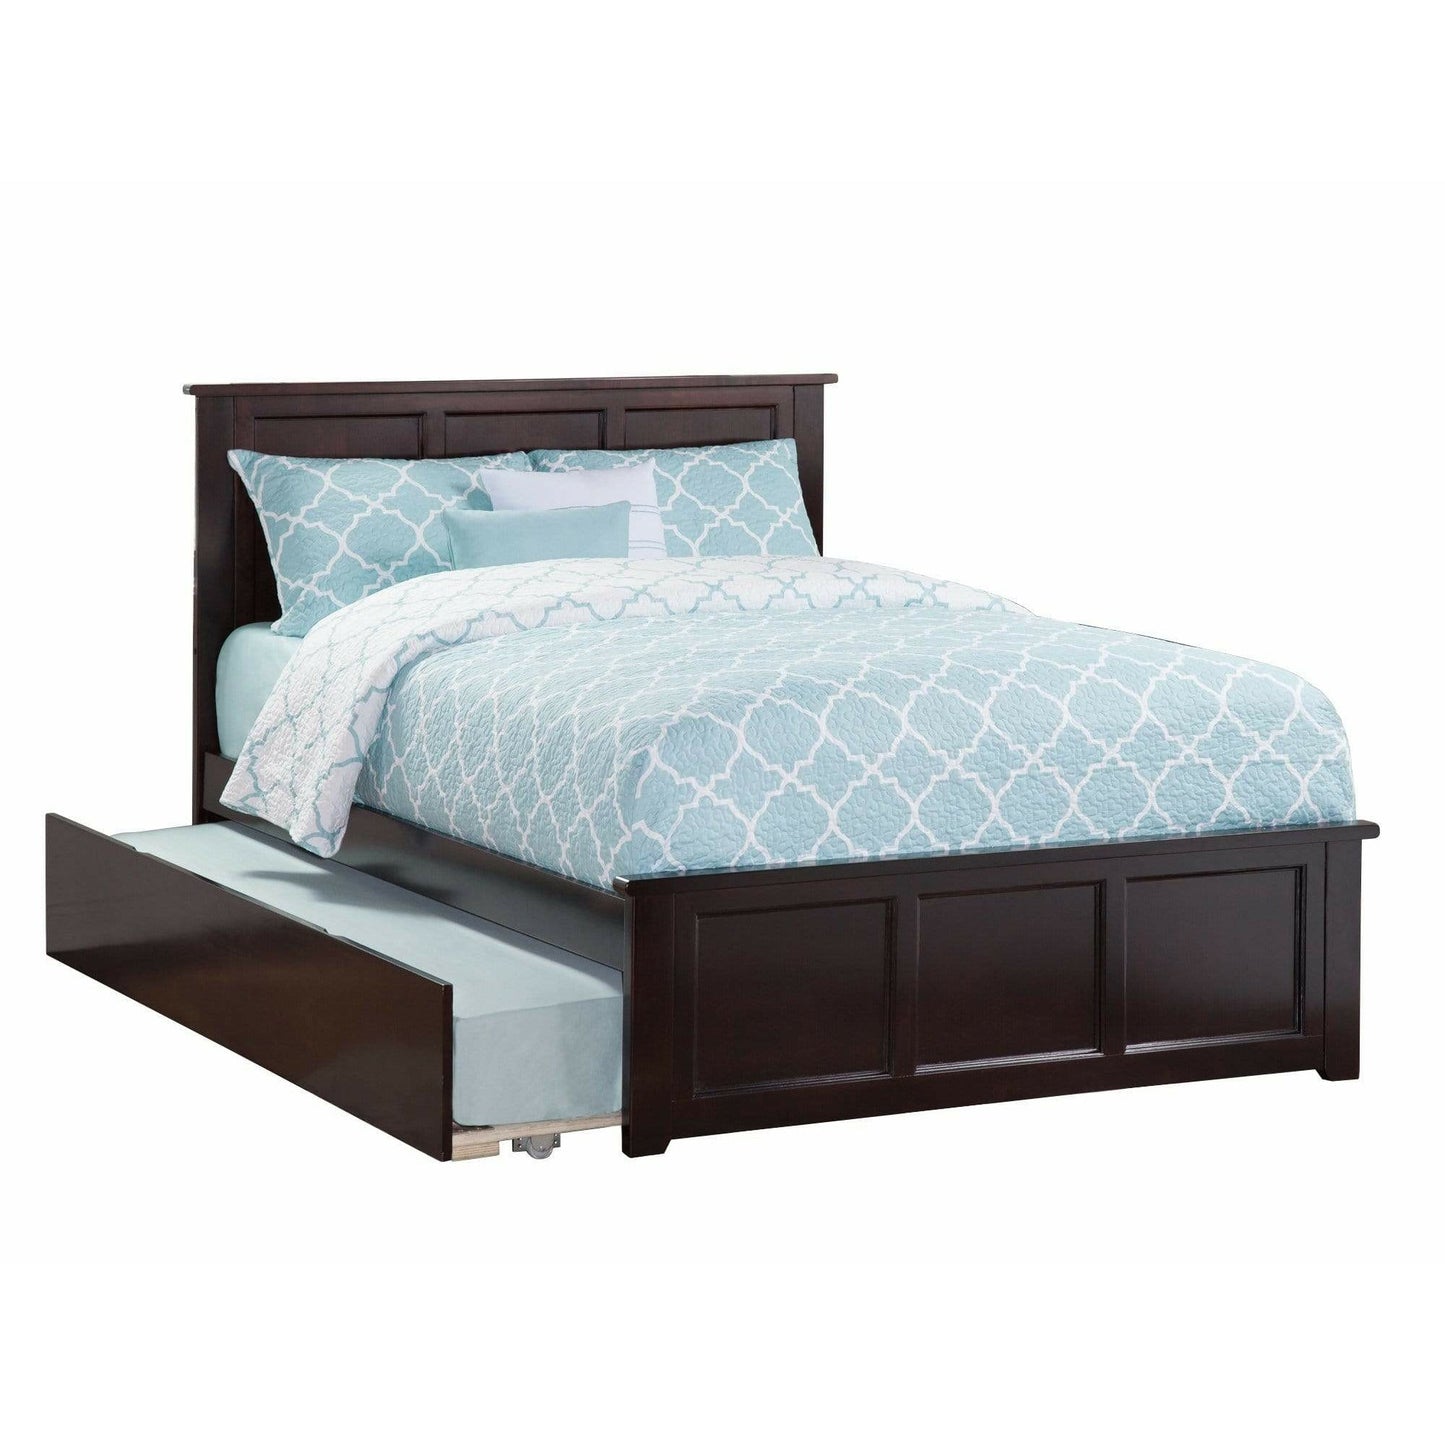 Atlantic Furniture Bed Madison Full Platform Bed with Matching Footboard with Twin Size Urban Trundle Bed in Espresso